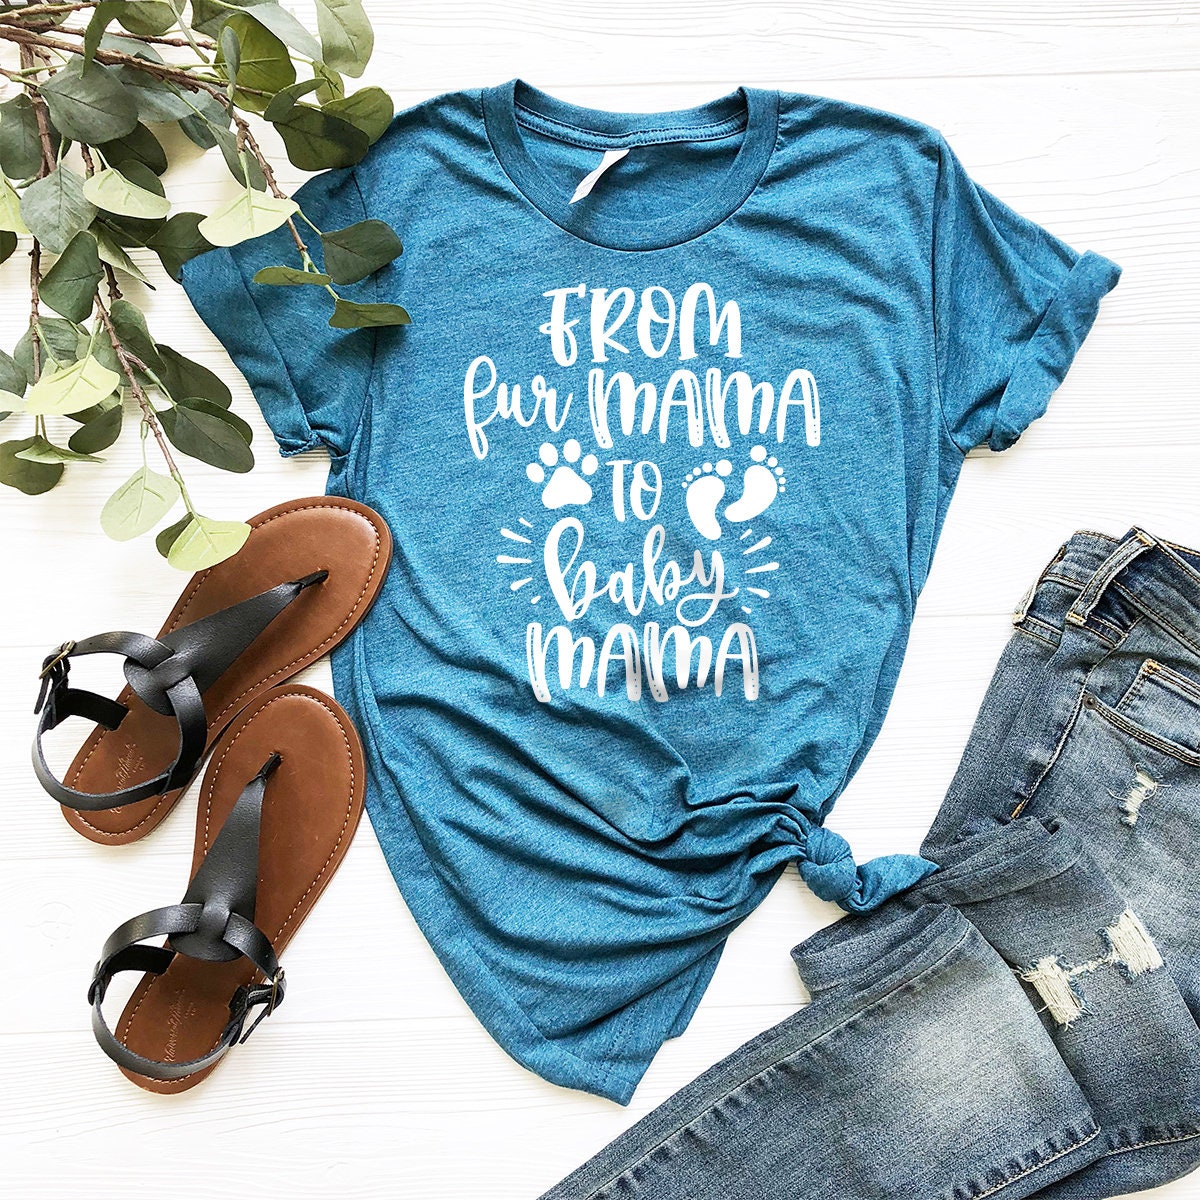 Baby Announcement Shirt, From Fur Mama To Baby Mama Shirt, New Mom Gif –